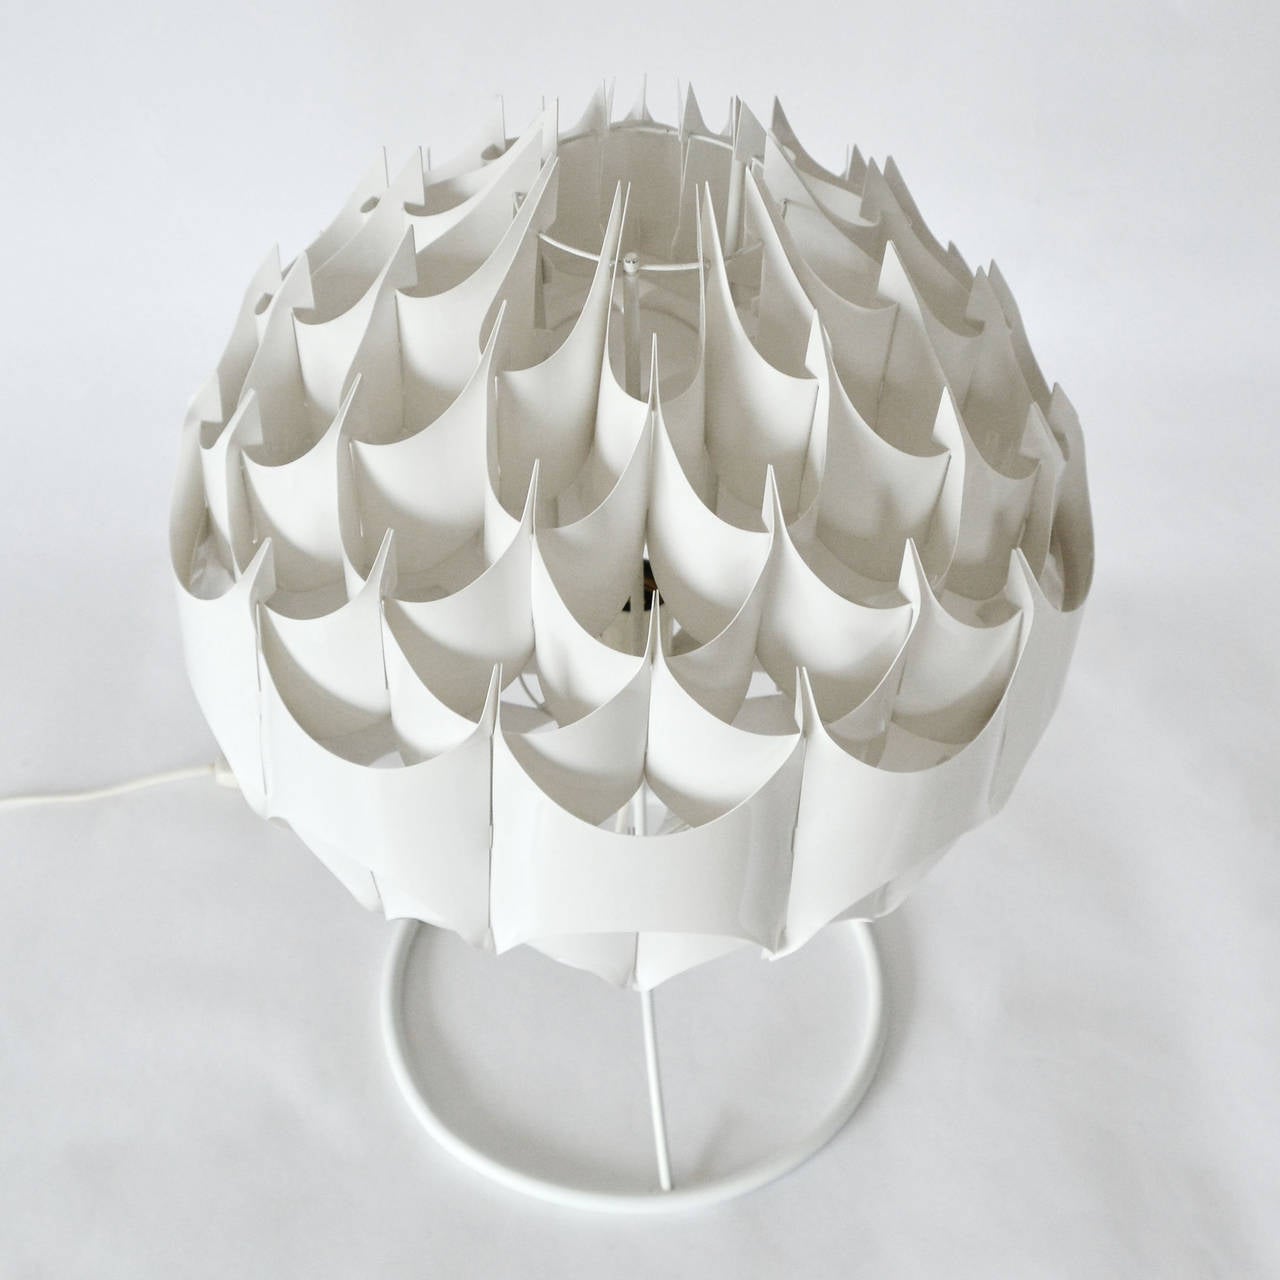 Very Rare table light or desk lamp designed by Havlova Milanda in 1969. Produced by VEST Leuchten in Vienna, Austria. It is made of a white lacquered metal frame and a shade built up of acrylic plastic elements. Labeled with 